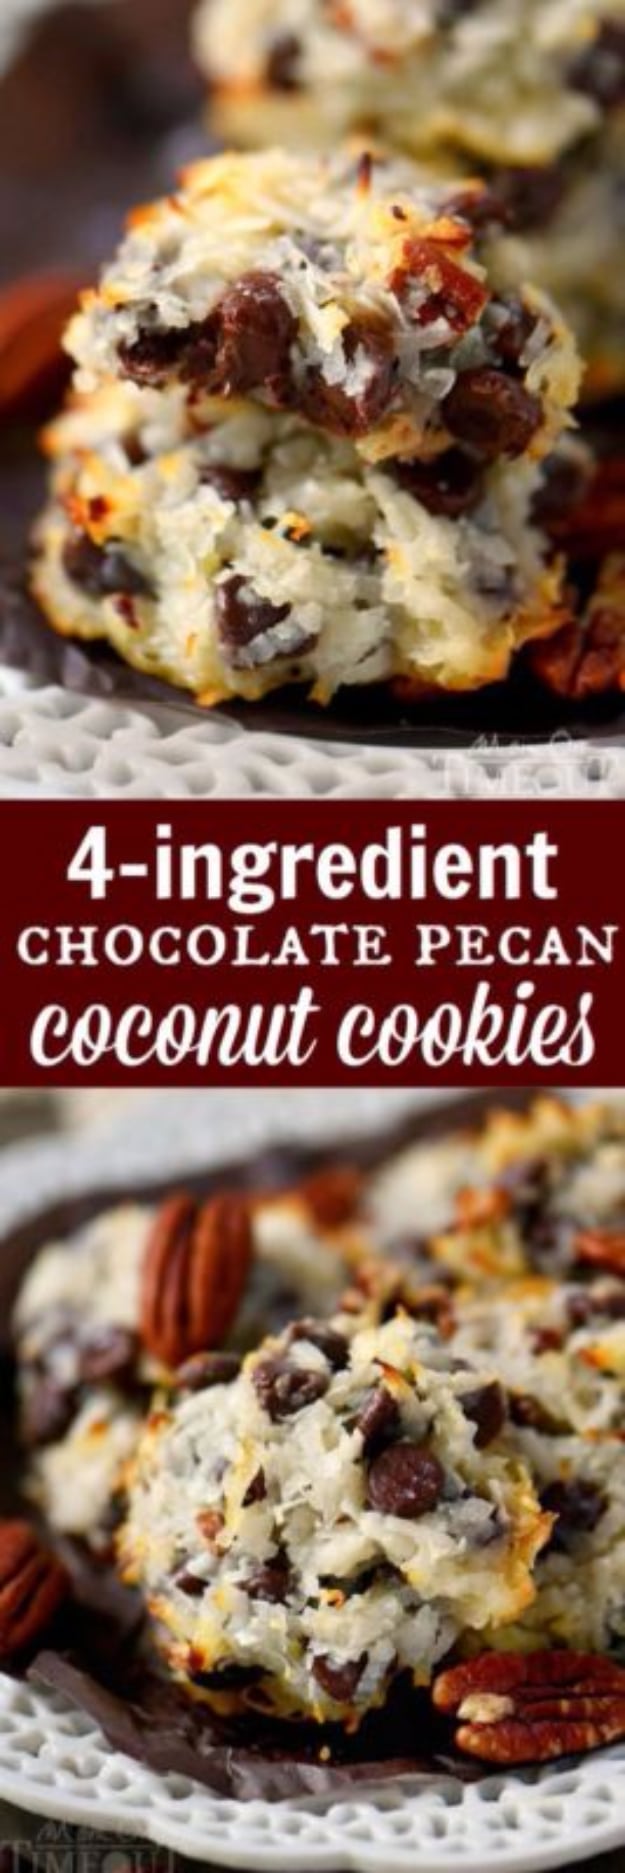 Last Minute Dessert Recipes and Ideas - Chocolate Pecan Coconut Cookies - Healthy and Easy Ideas for No Bake Recipe Foods, Chocolate, Peanut Butter. Best Simple Ideas for Summer, For A Crowd and for Parties 